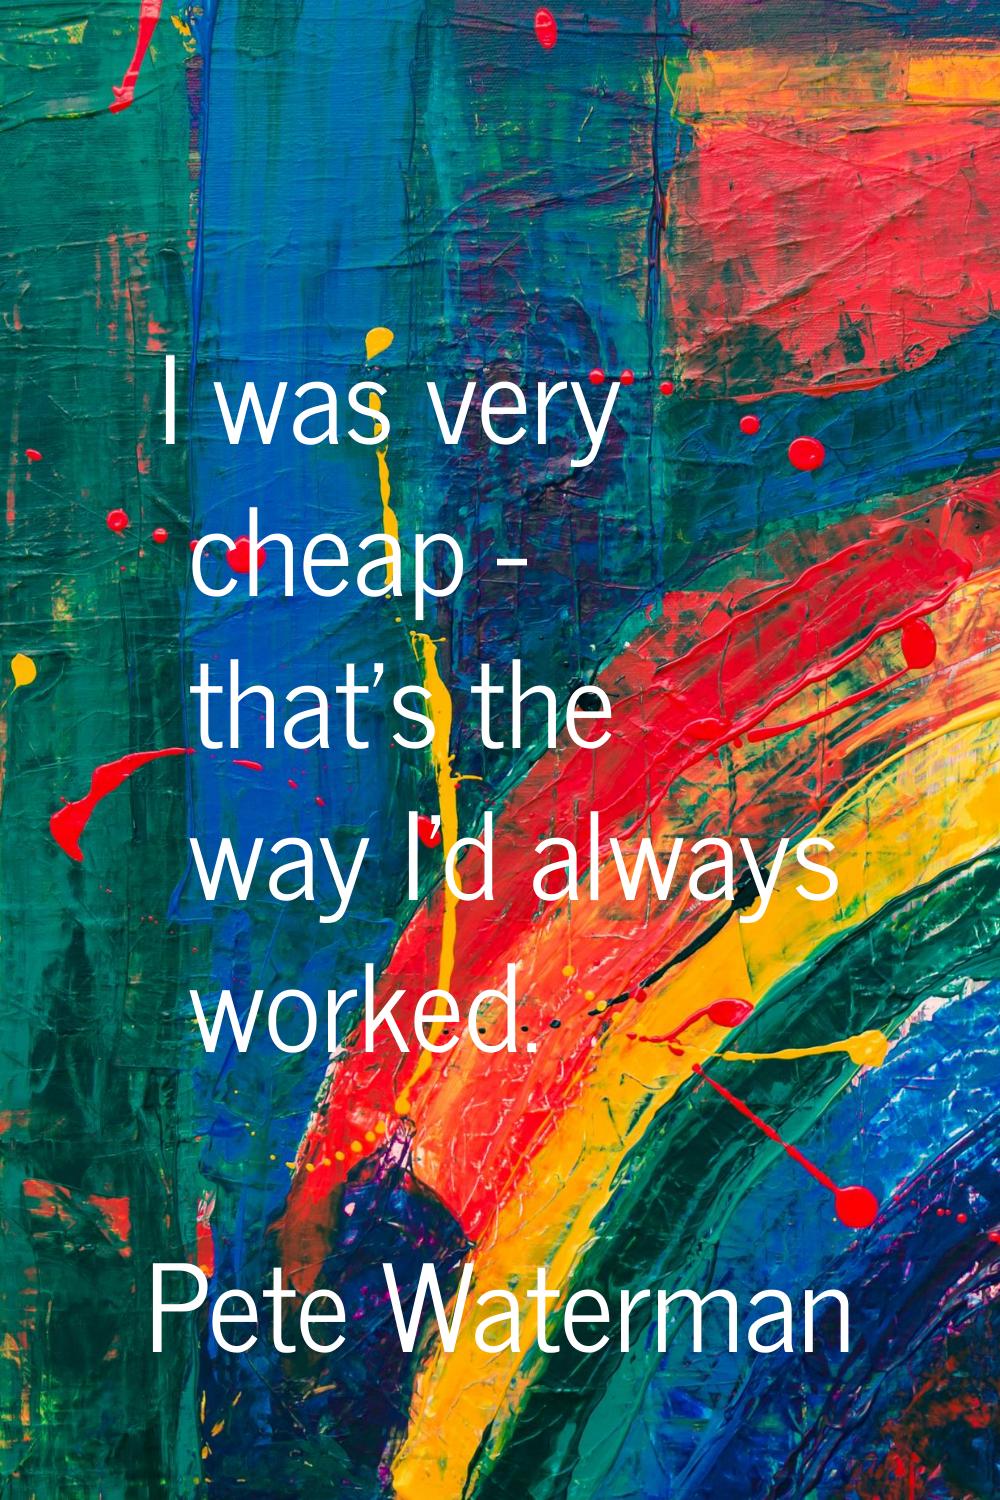 I was very cheap - that's the way I'd always worked.